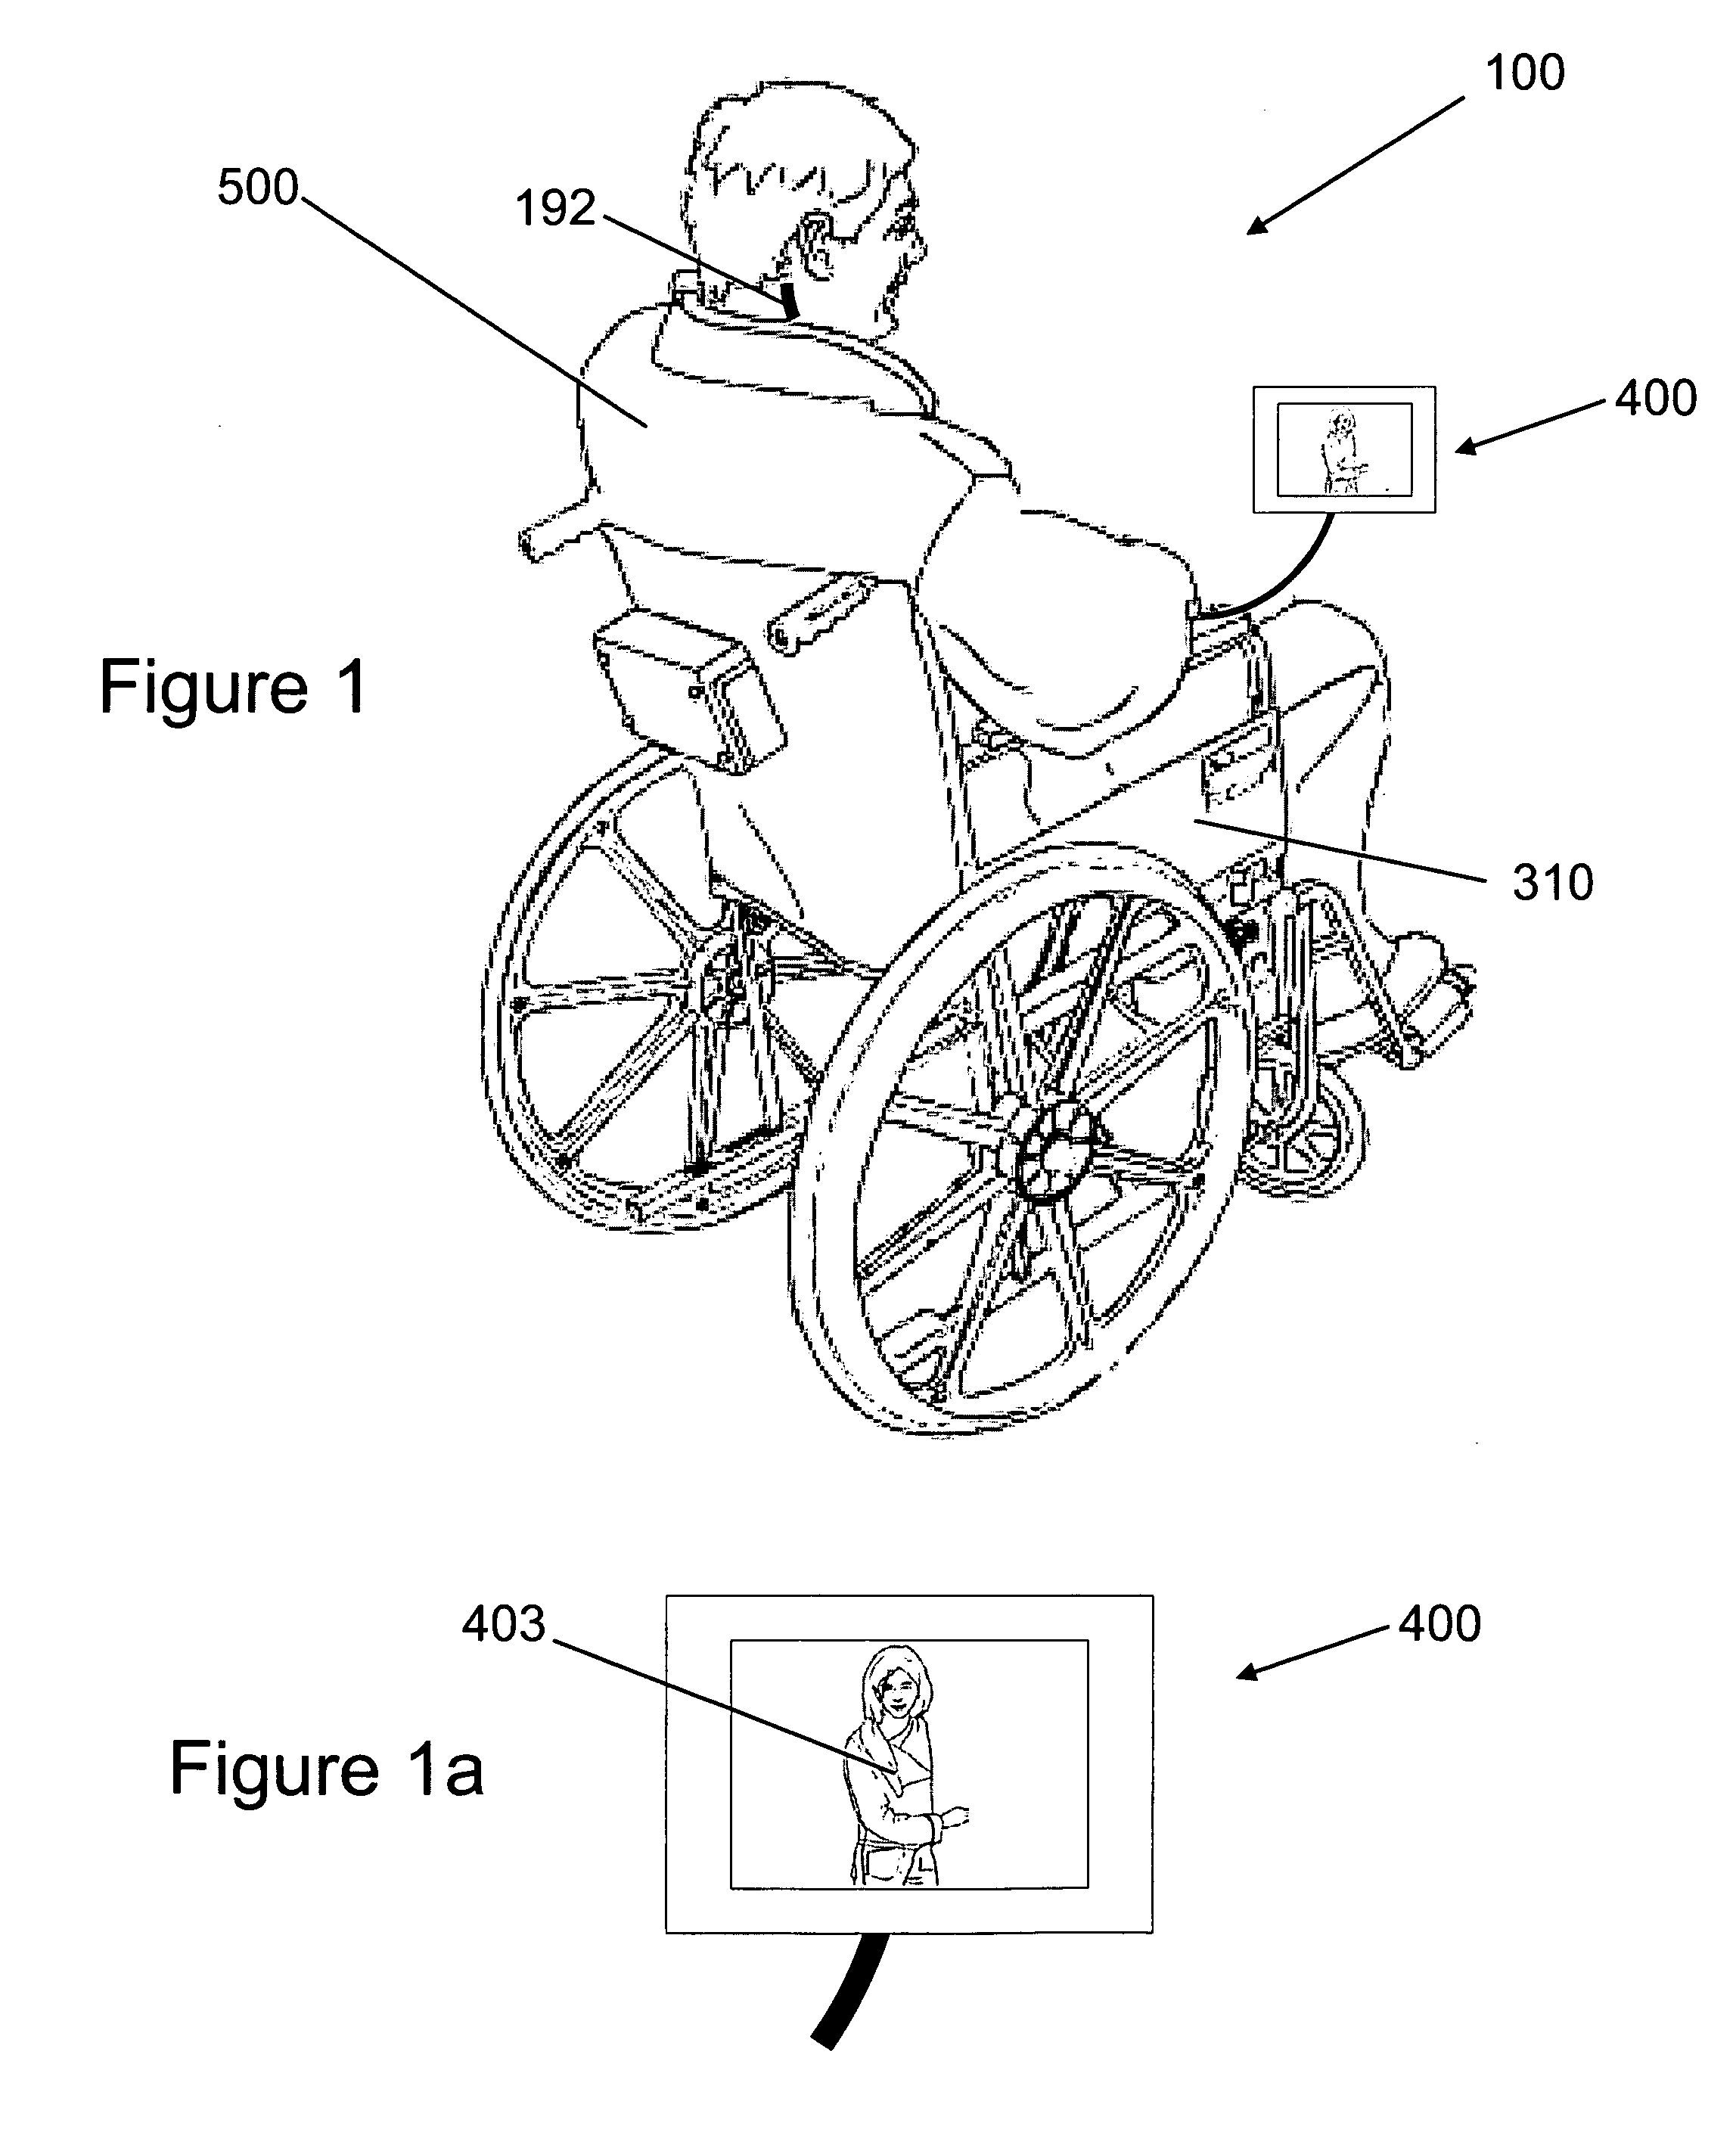 Biological interface system with automated configuration